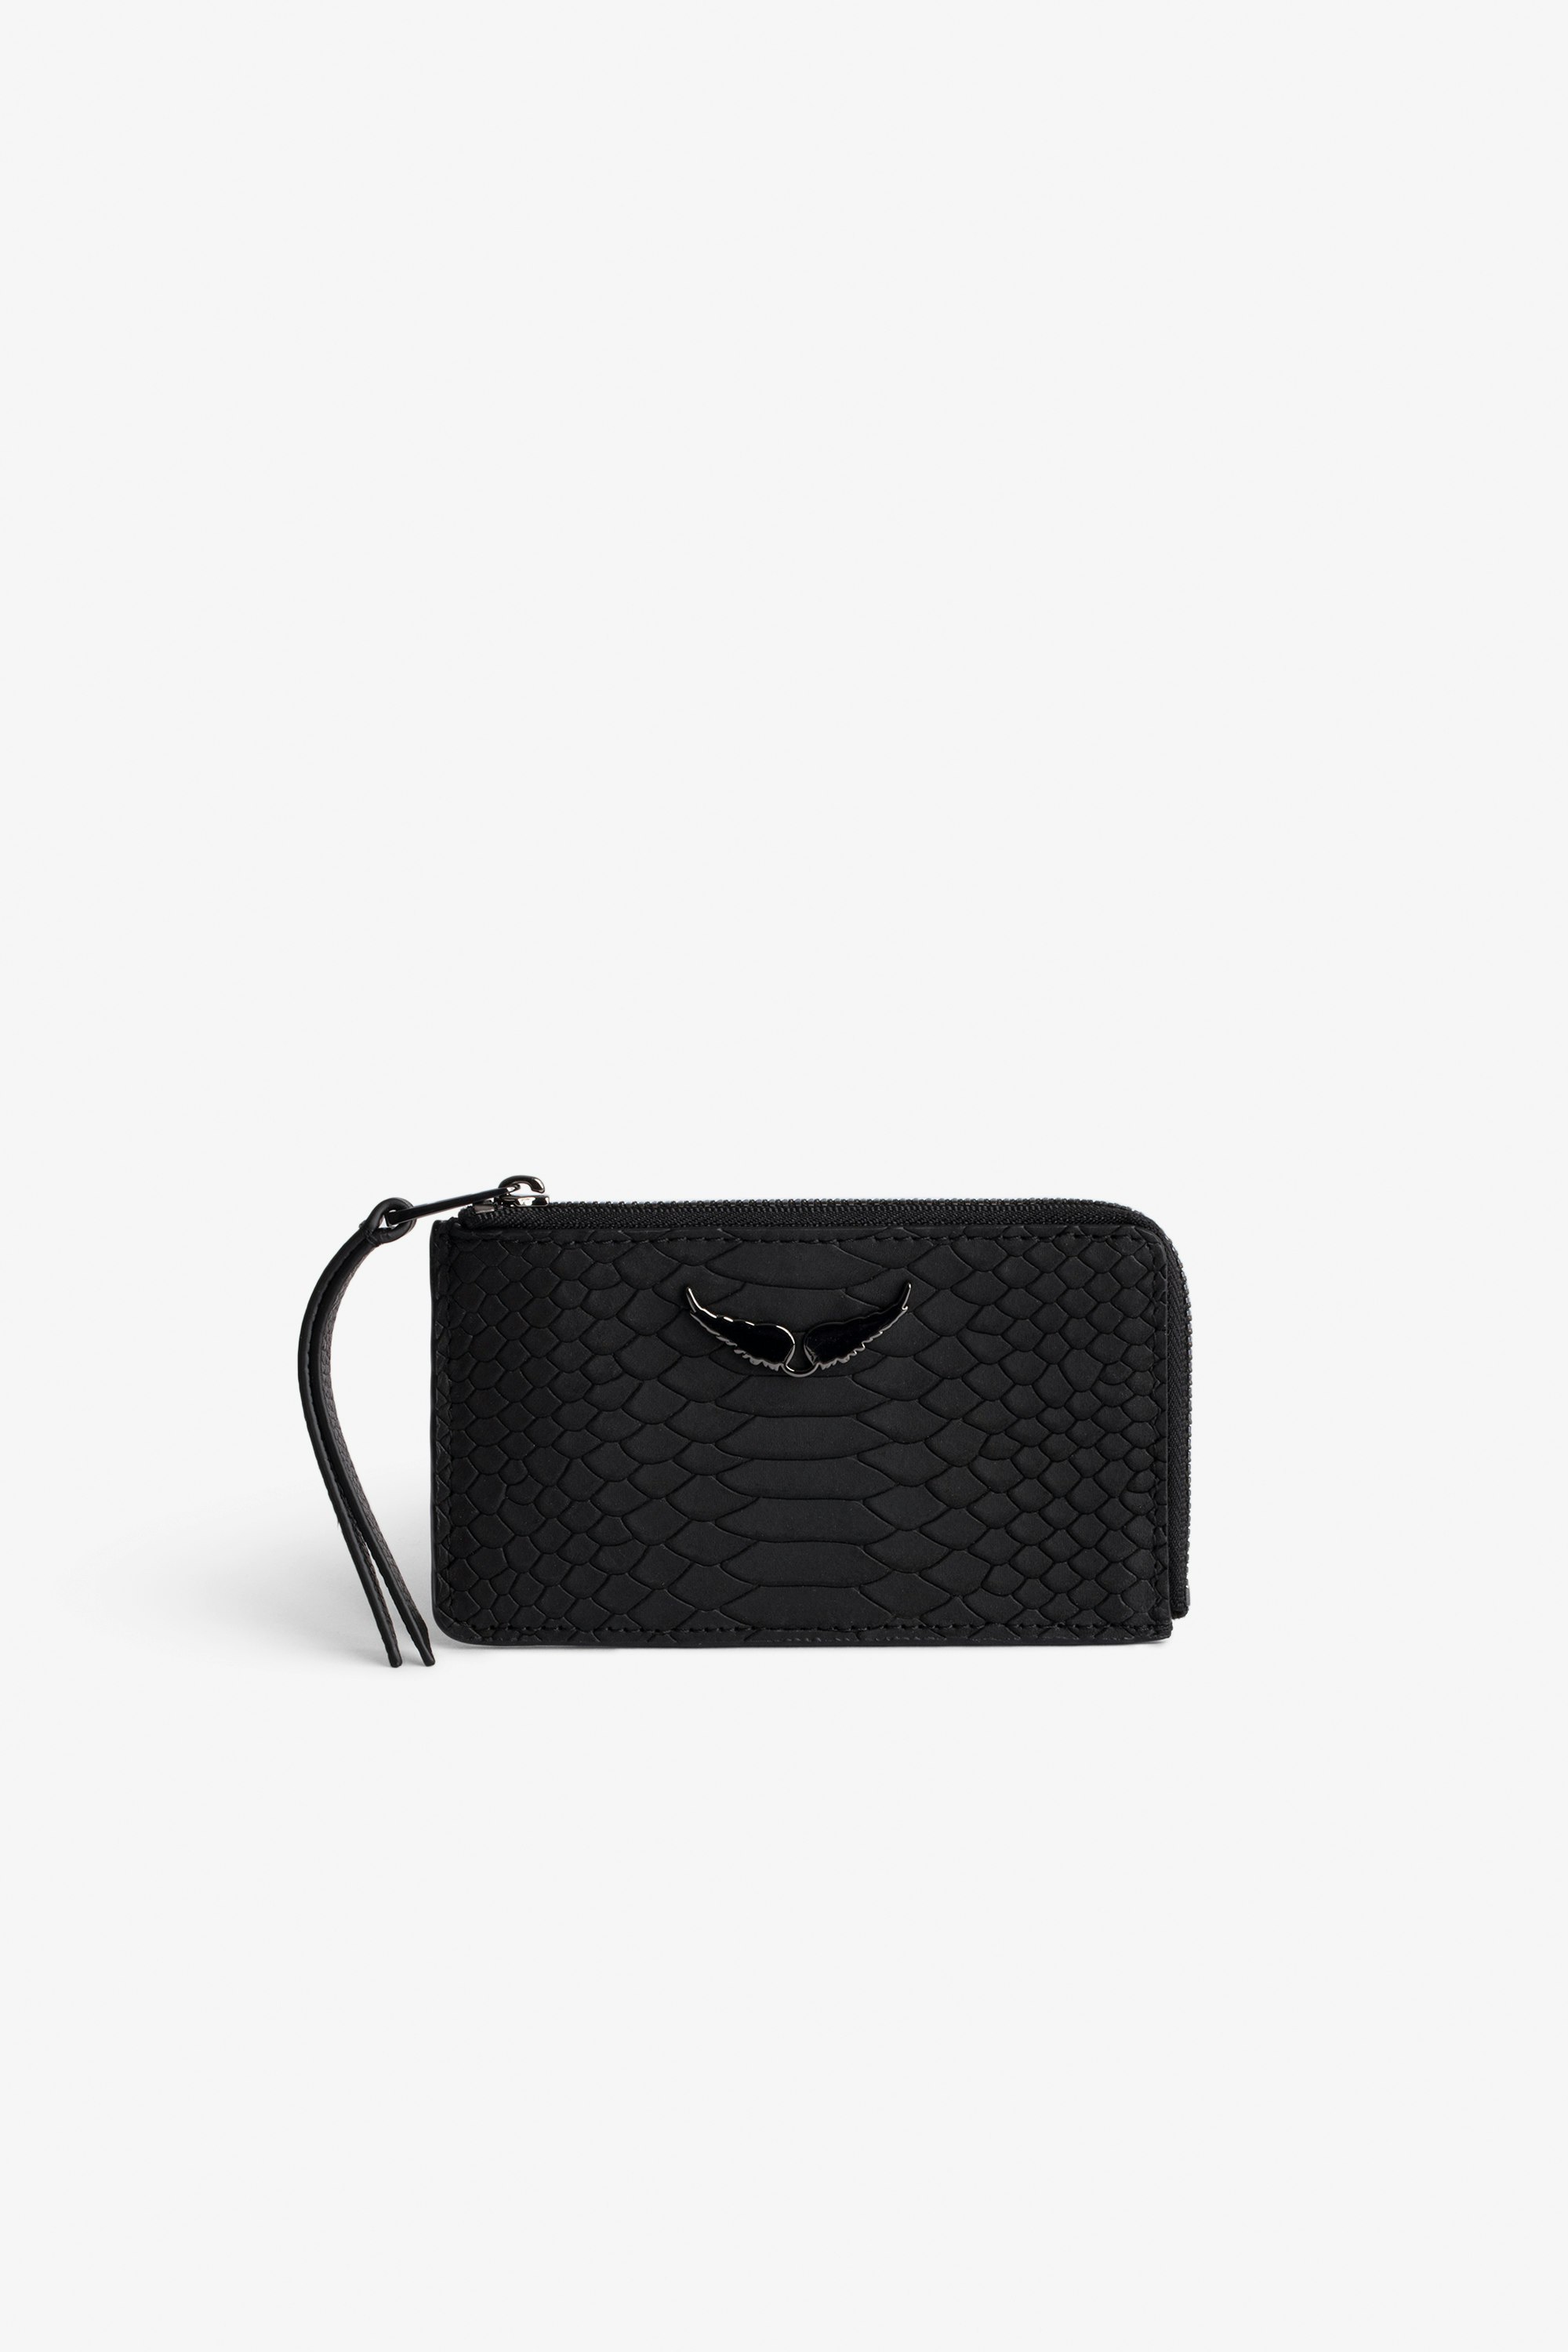 ZV Soft Savage Card Case - Women's card case in black python-effect leather